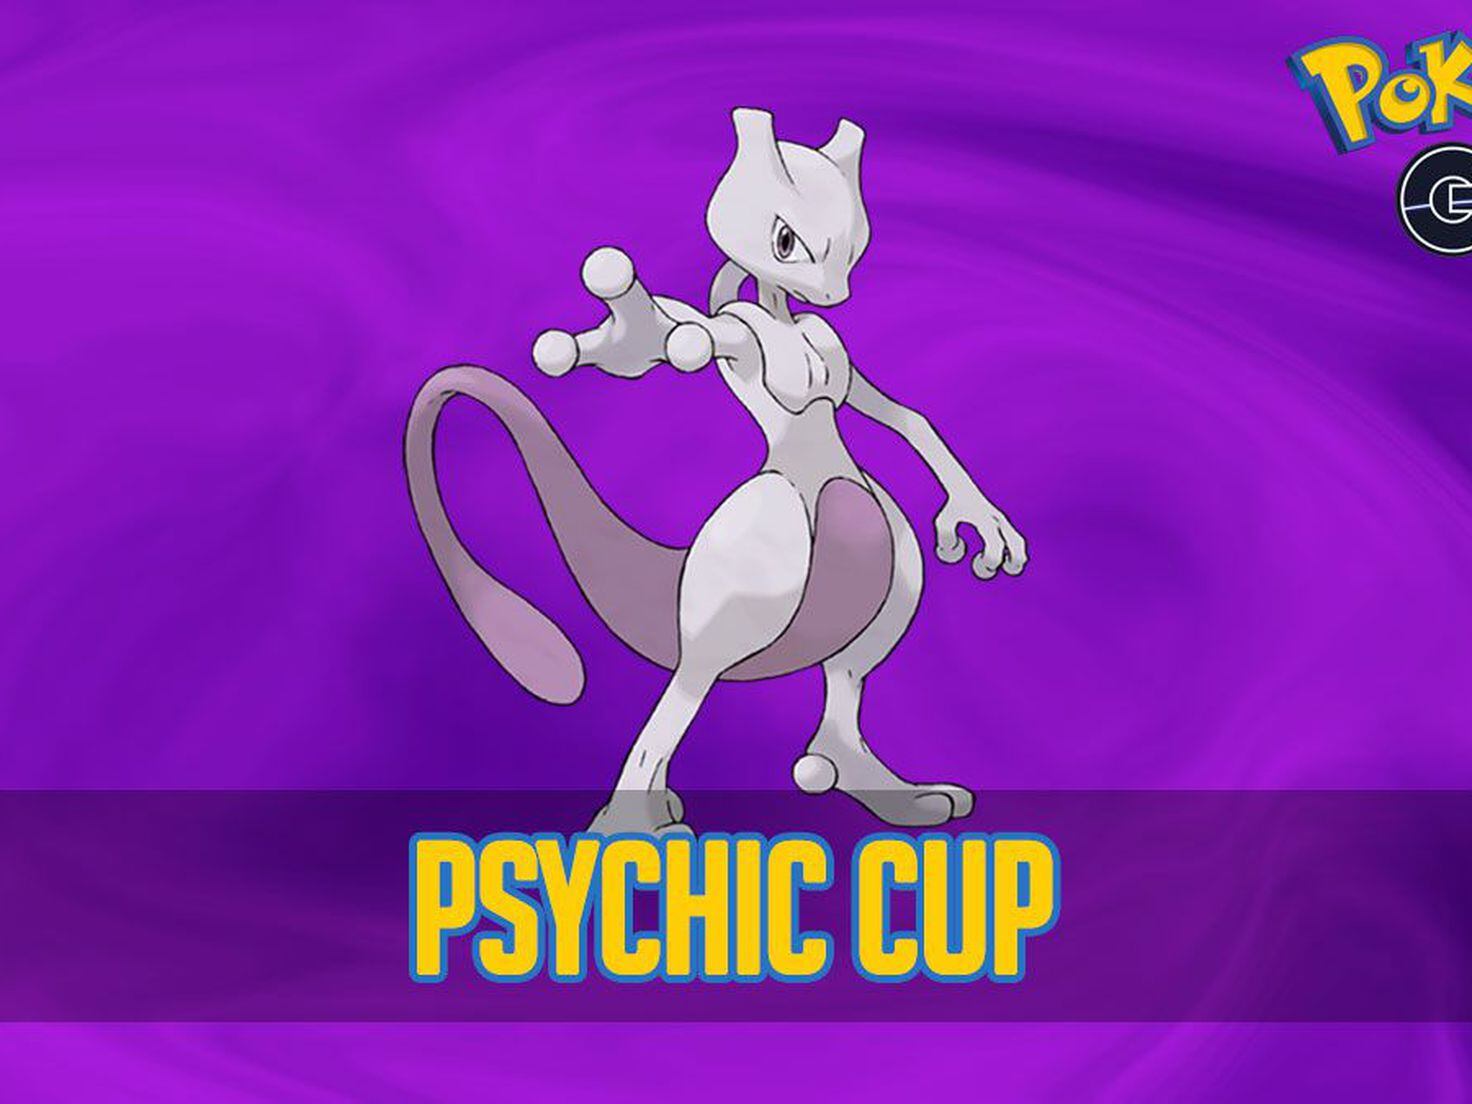 Psychic Cup in Pokémon GO: What are the best teams and moves